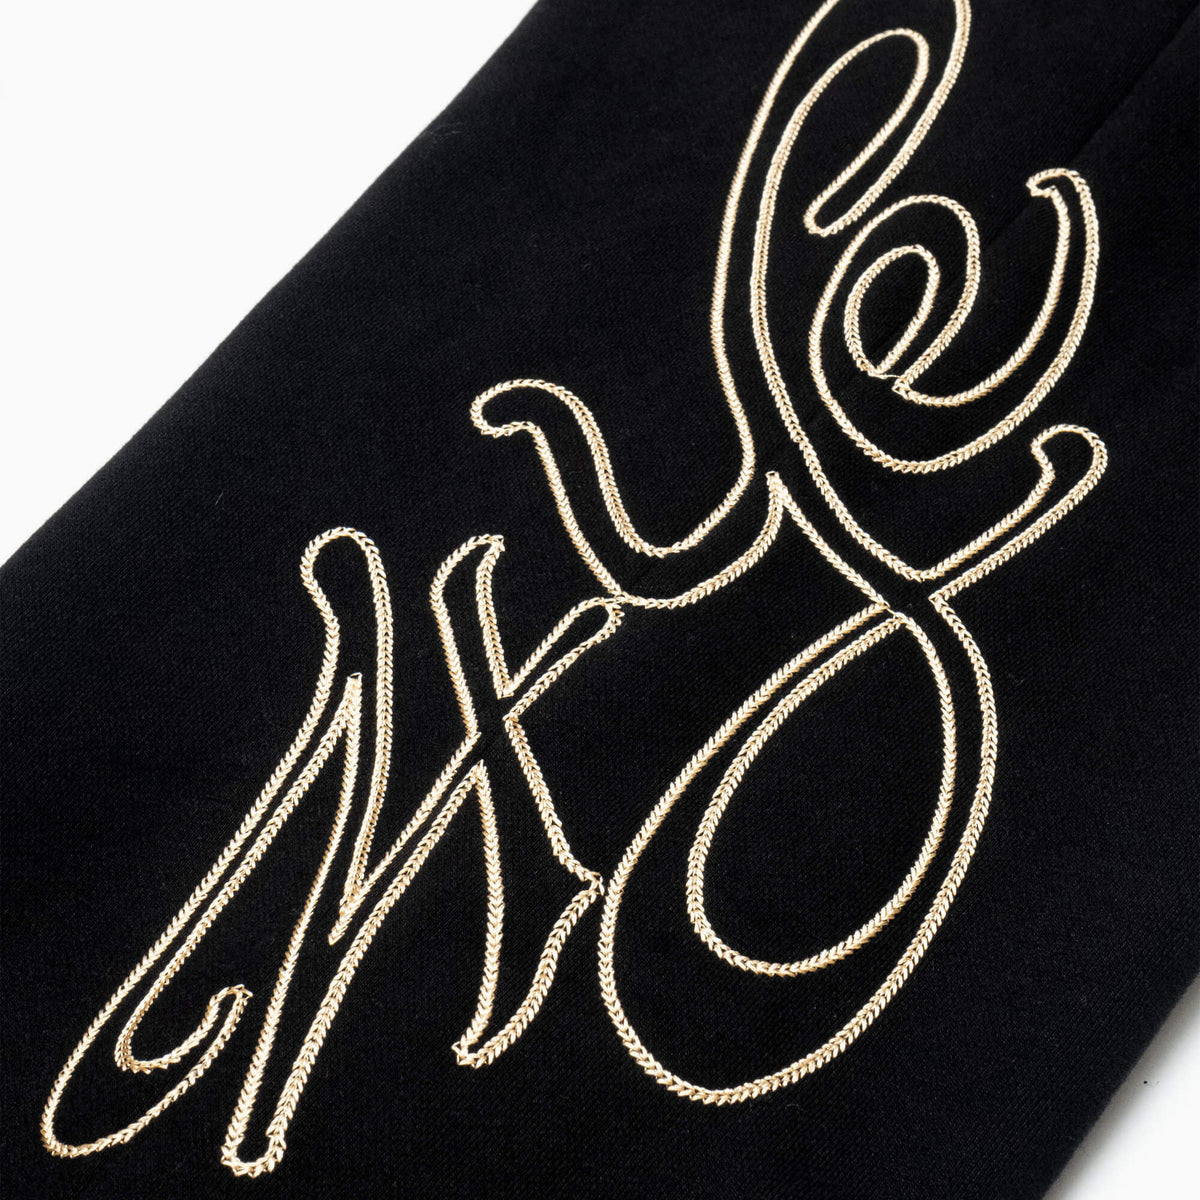 Close up of 4YE chain stitched logo detail in gold contrast stitching.